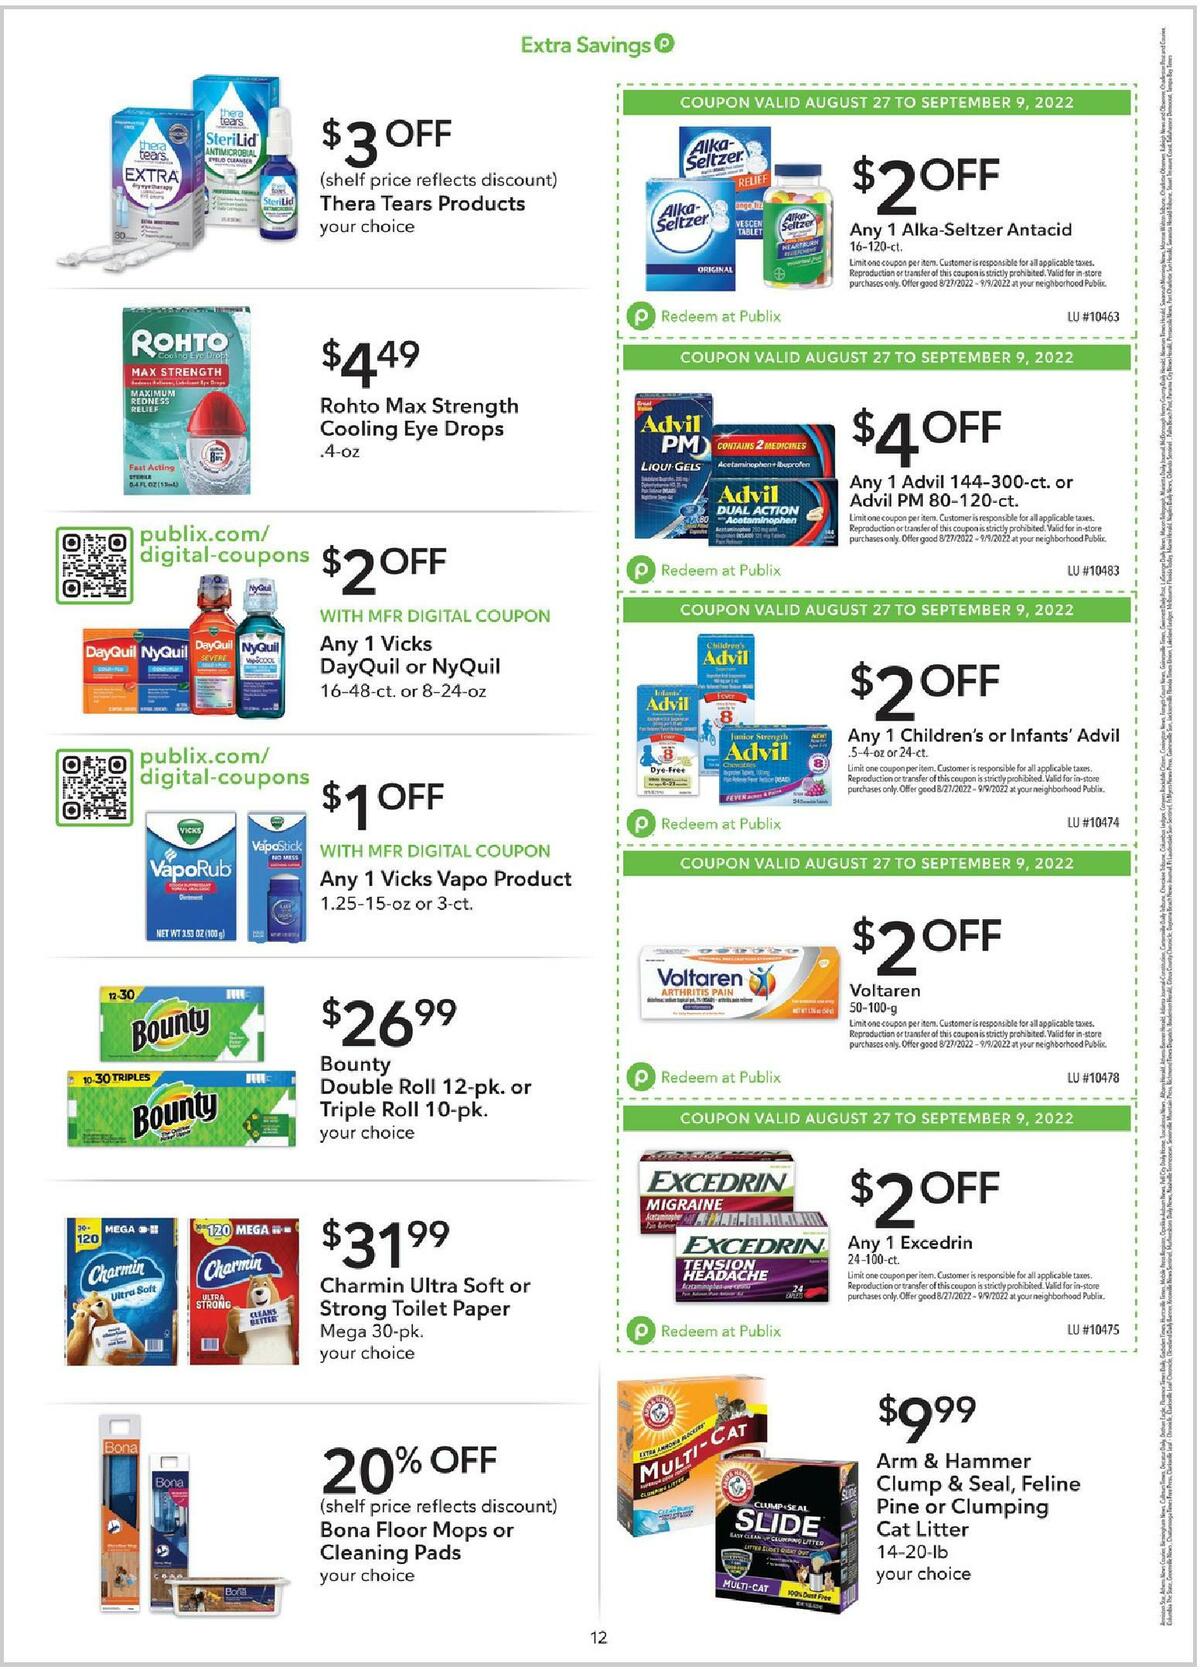 Publix Extra Savings Weekly Ad from August 27